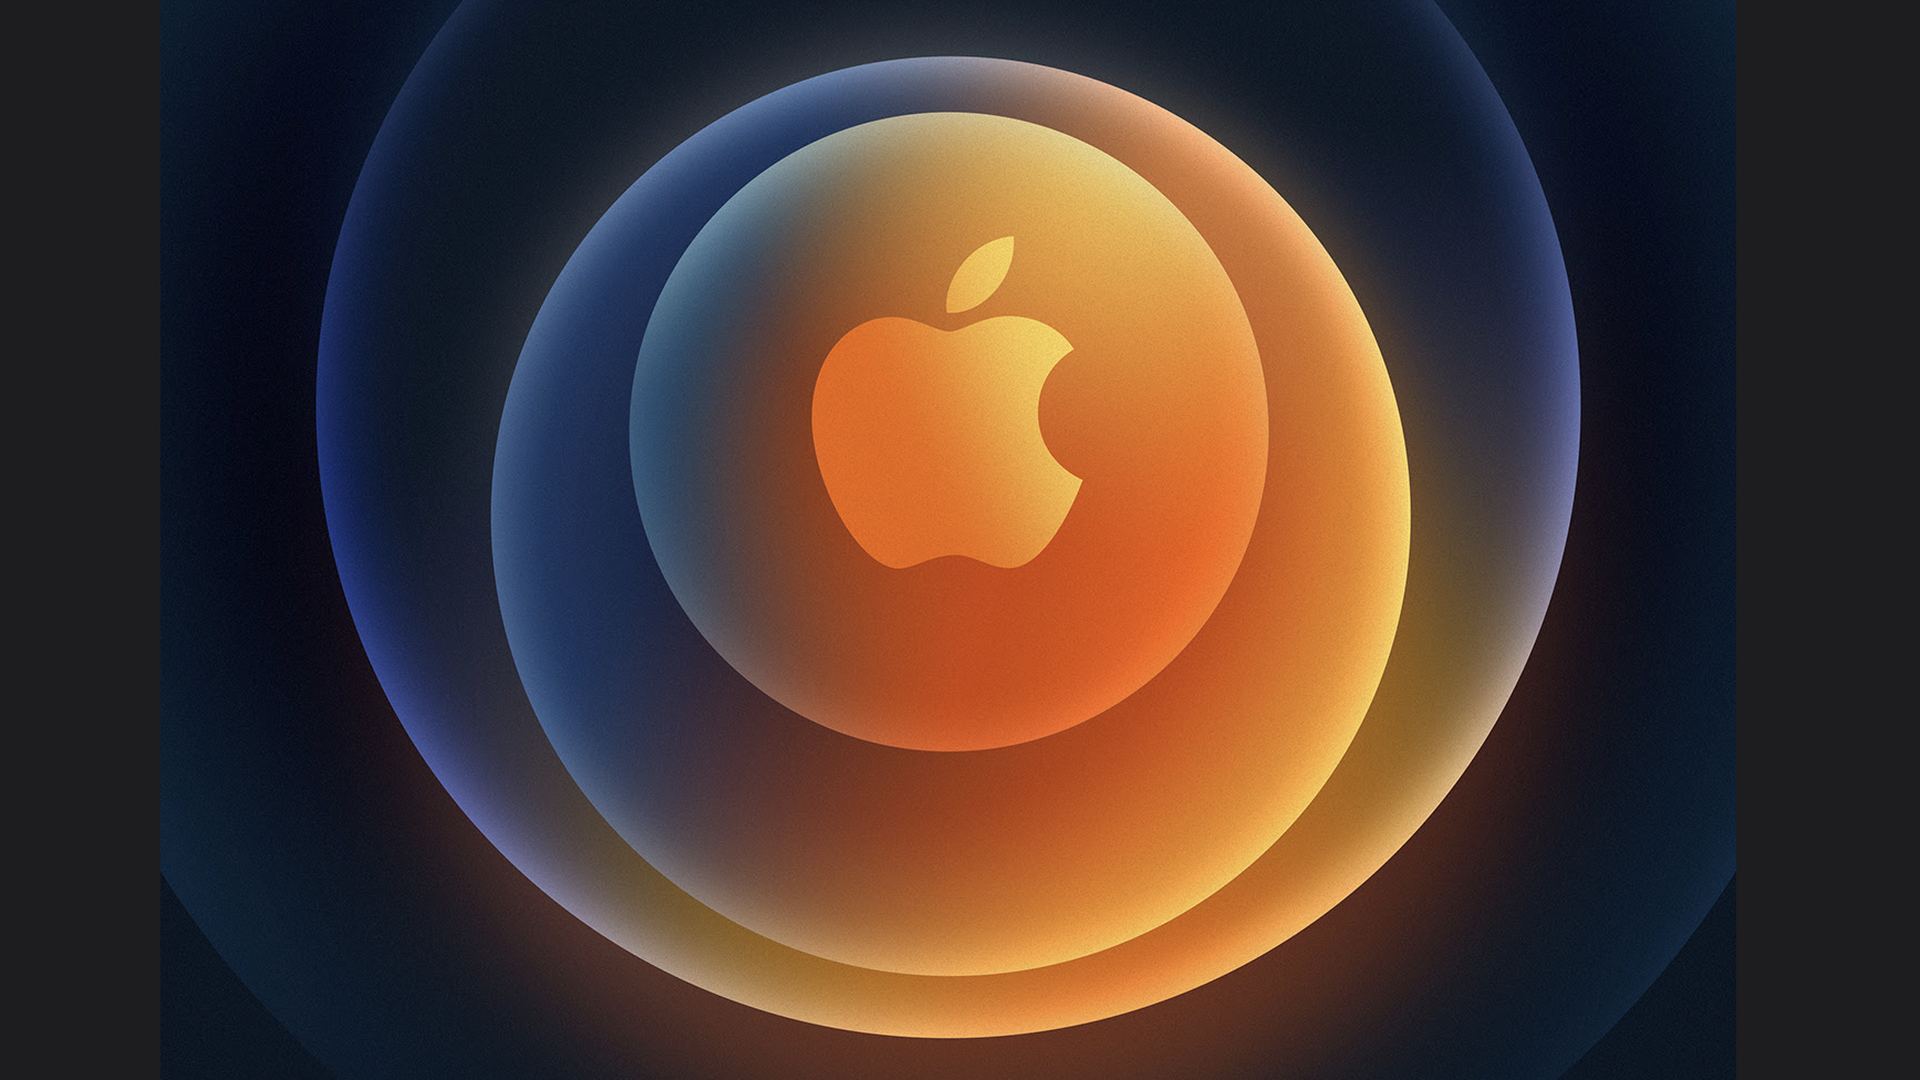 Am illustration of an Apple logo surrounded by several abstract circles